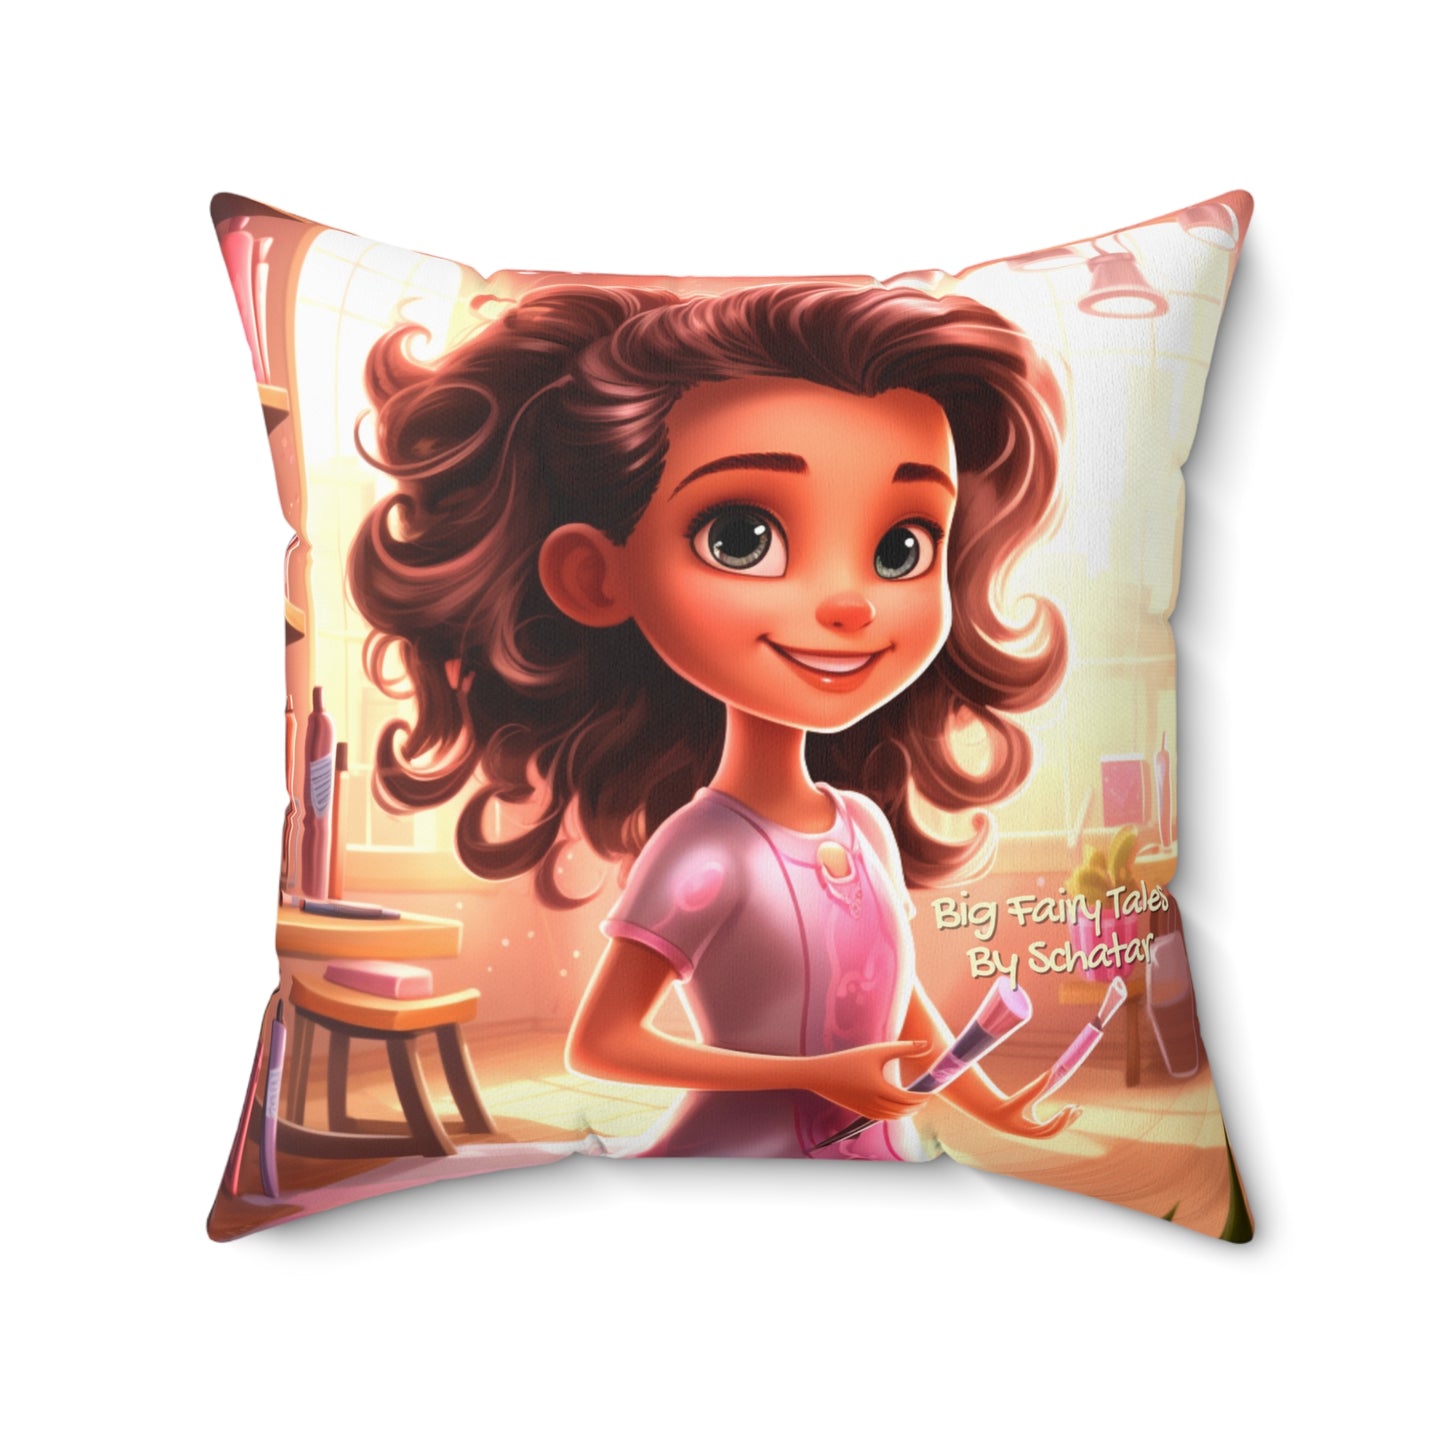 Cosmetic Line Founder - Big Little Professionals Plush Pillow 21 From Big Fairy Tales By Schatar